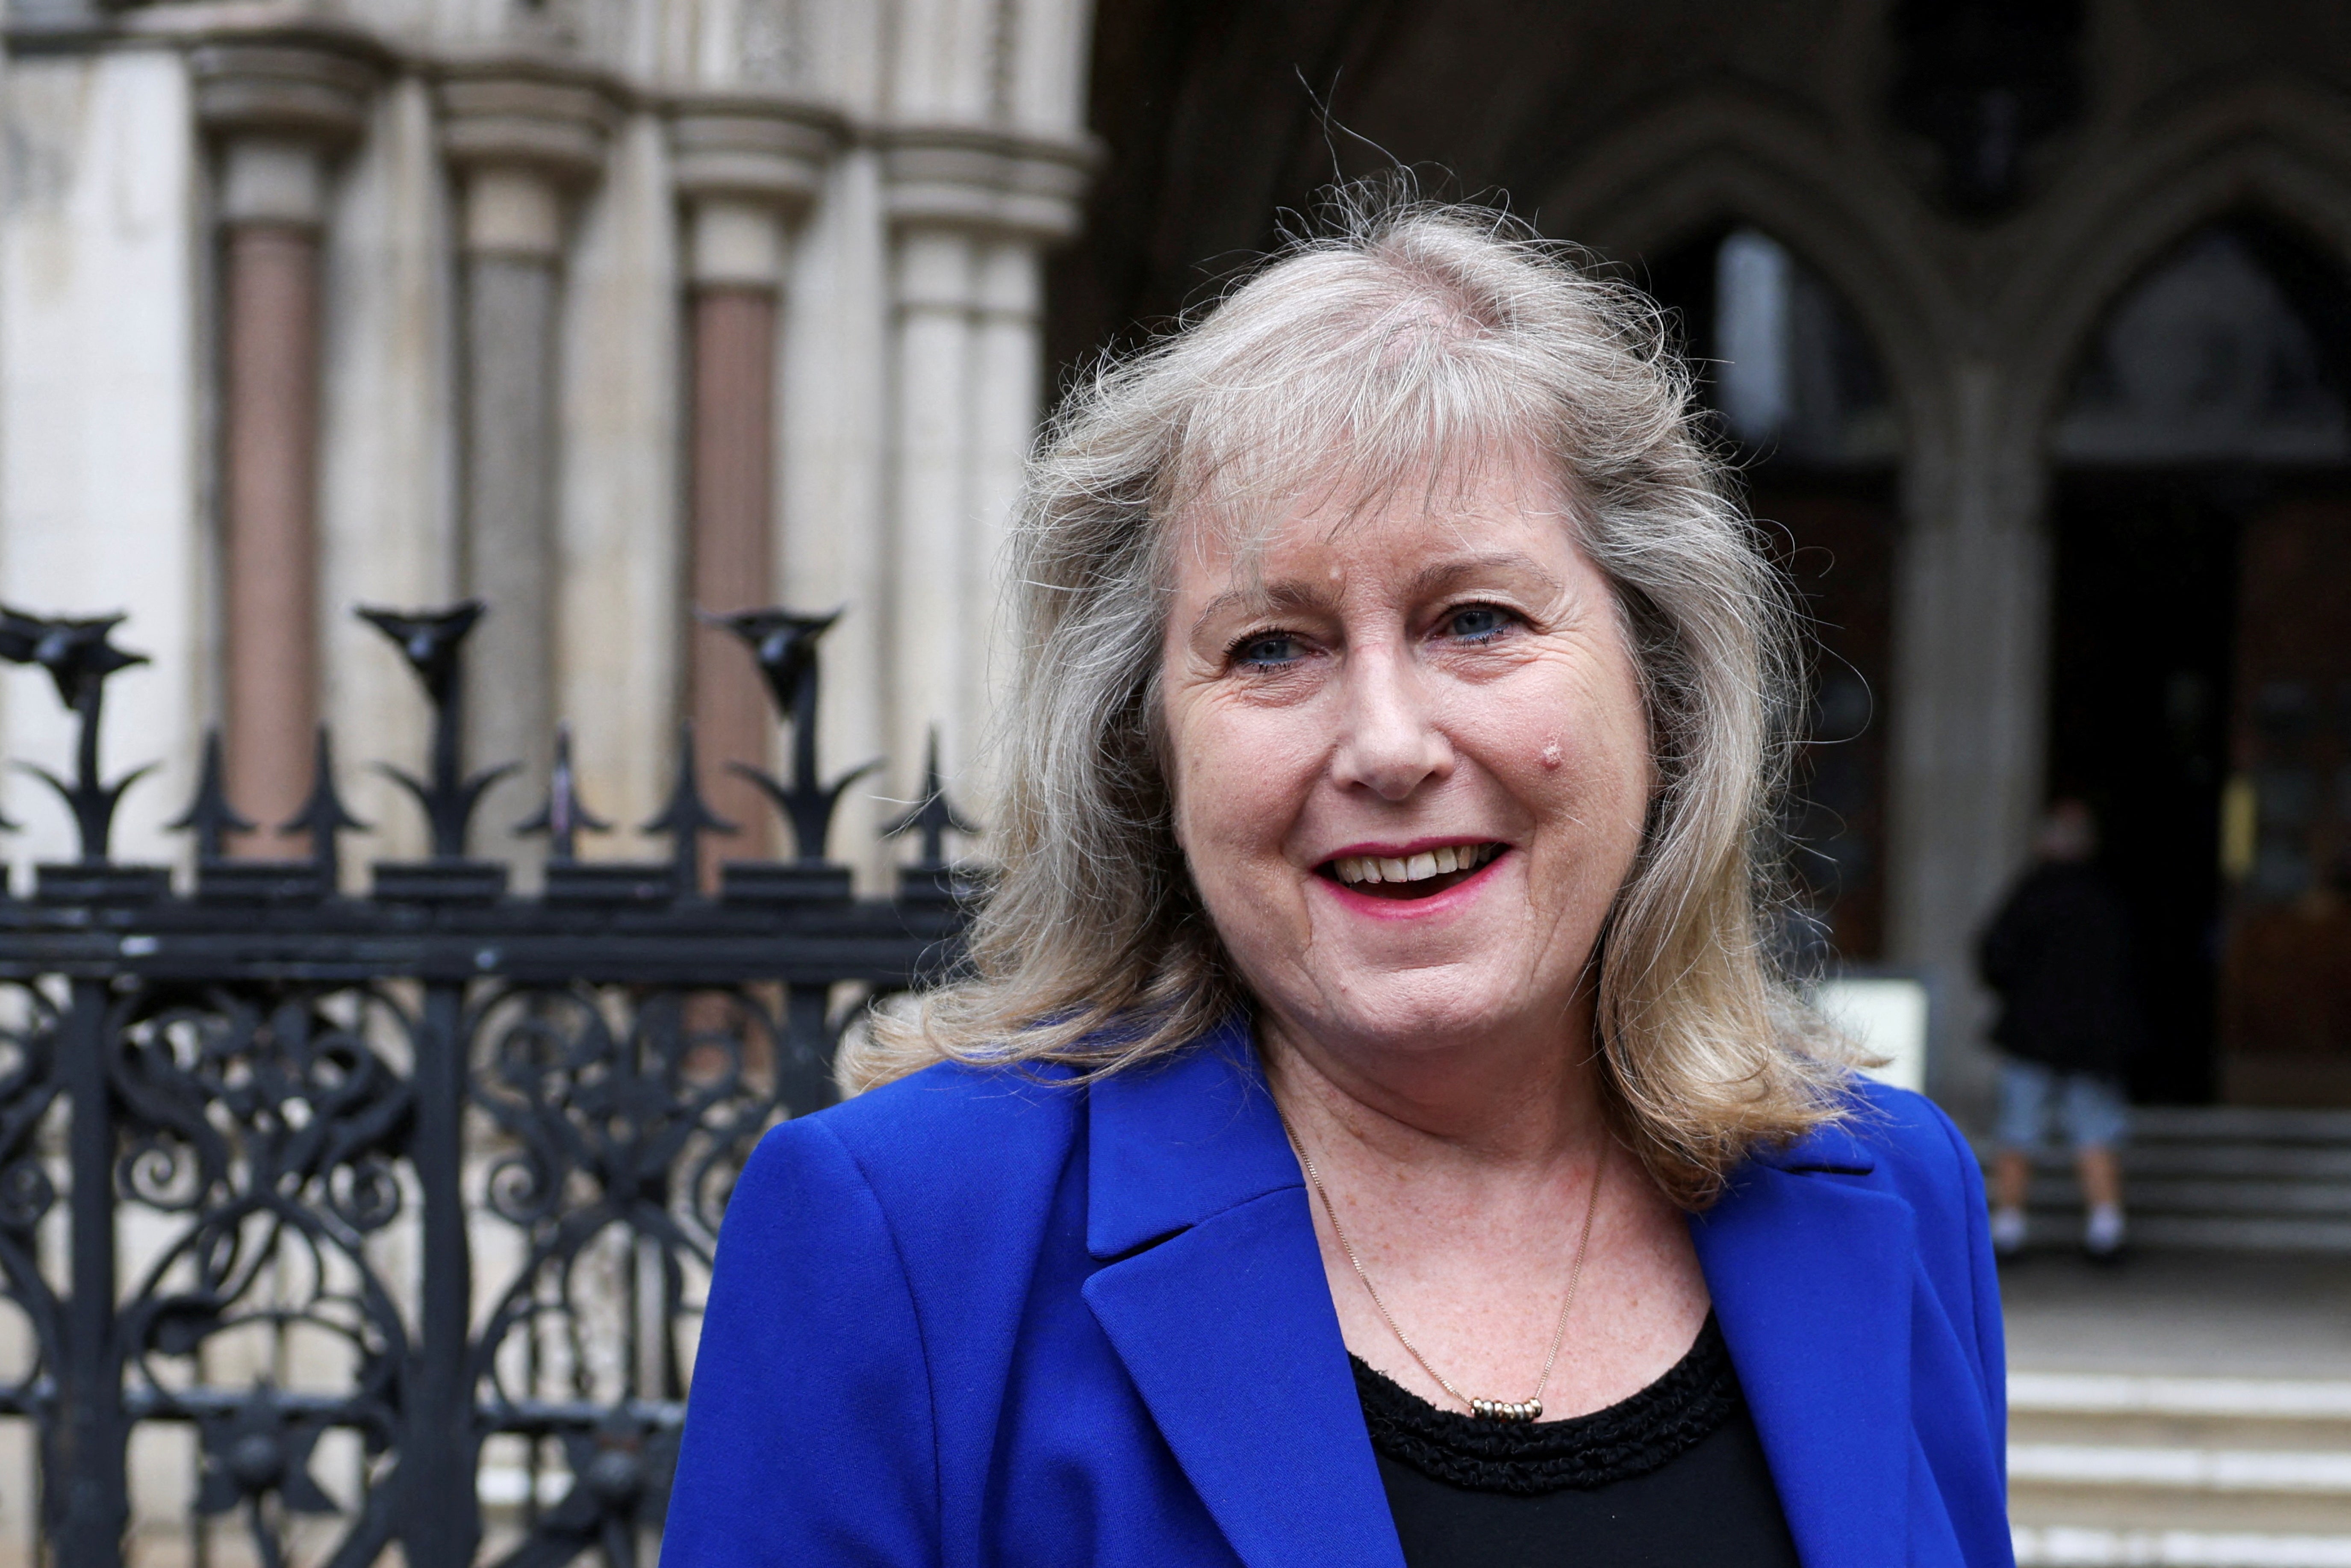 Conservative candidate Susan Hall has narrowed the gap with Mr Khan in the latest opinion polls